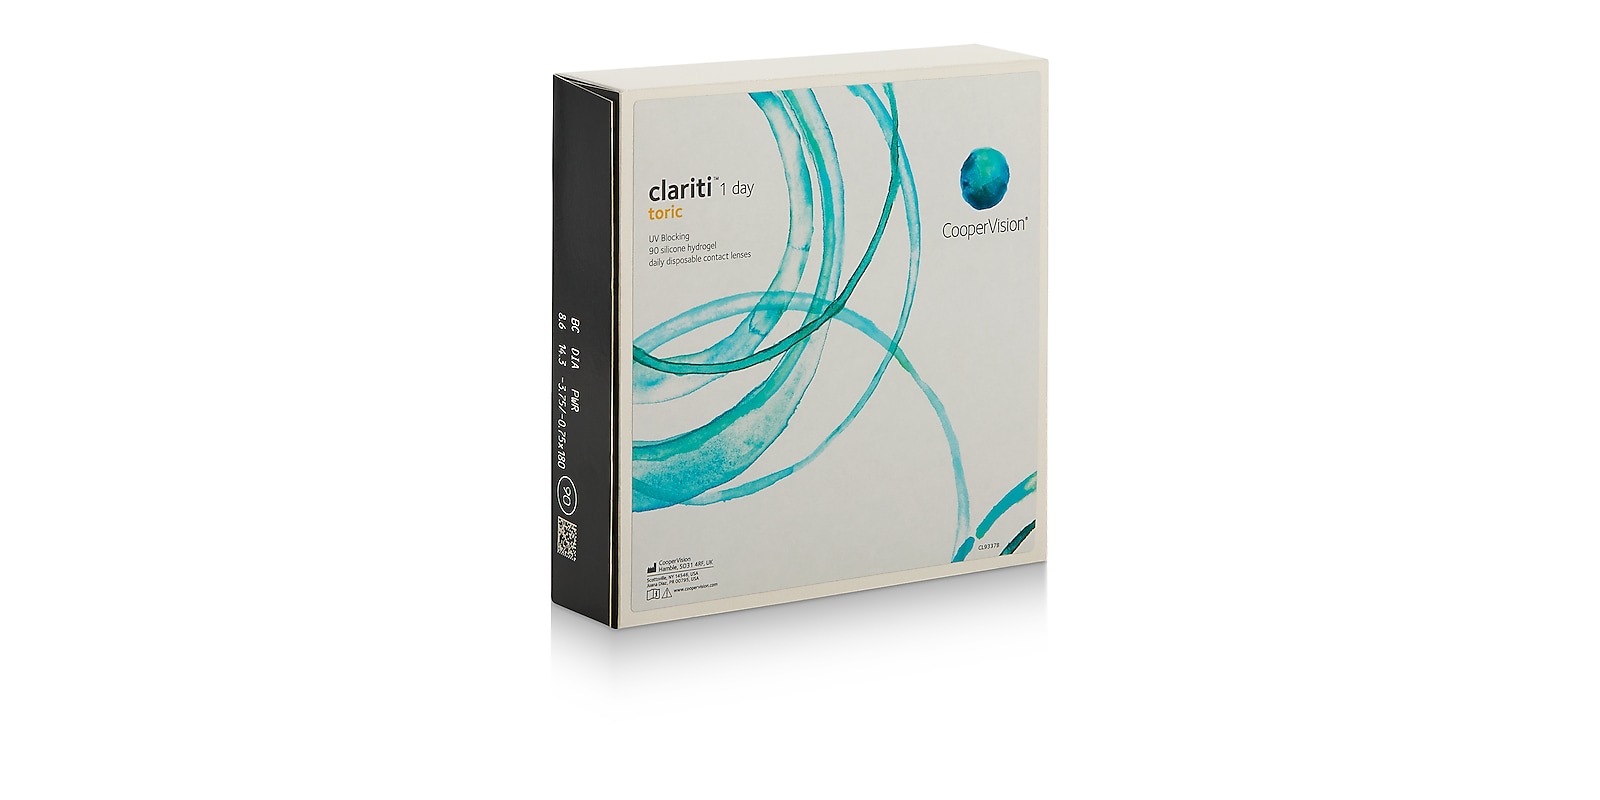 clariti-1-day-toric-90-pack-contactsdirect